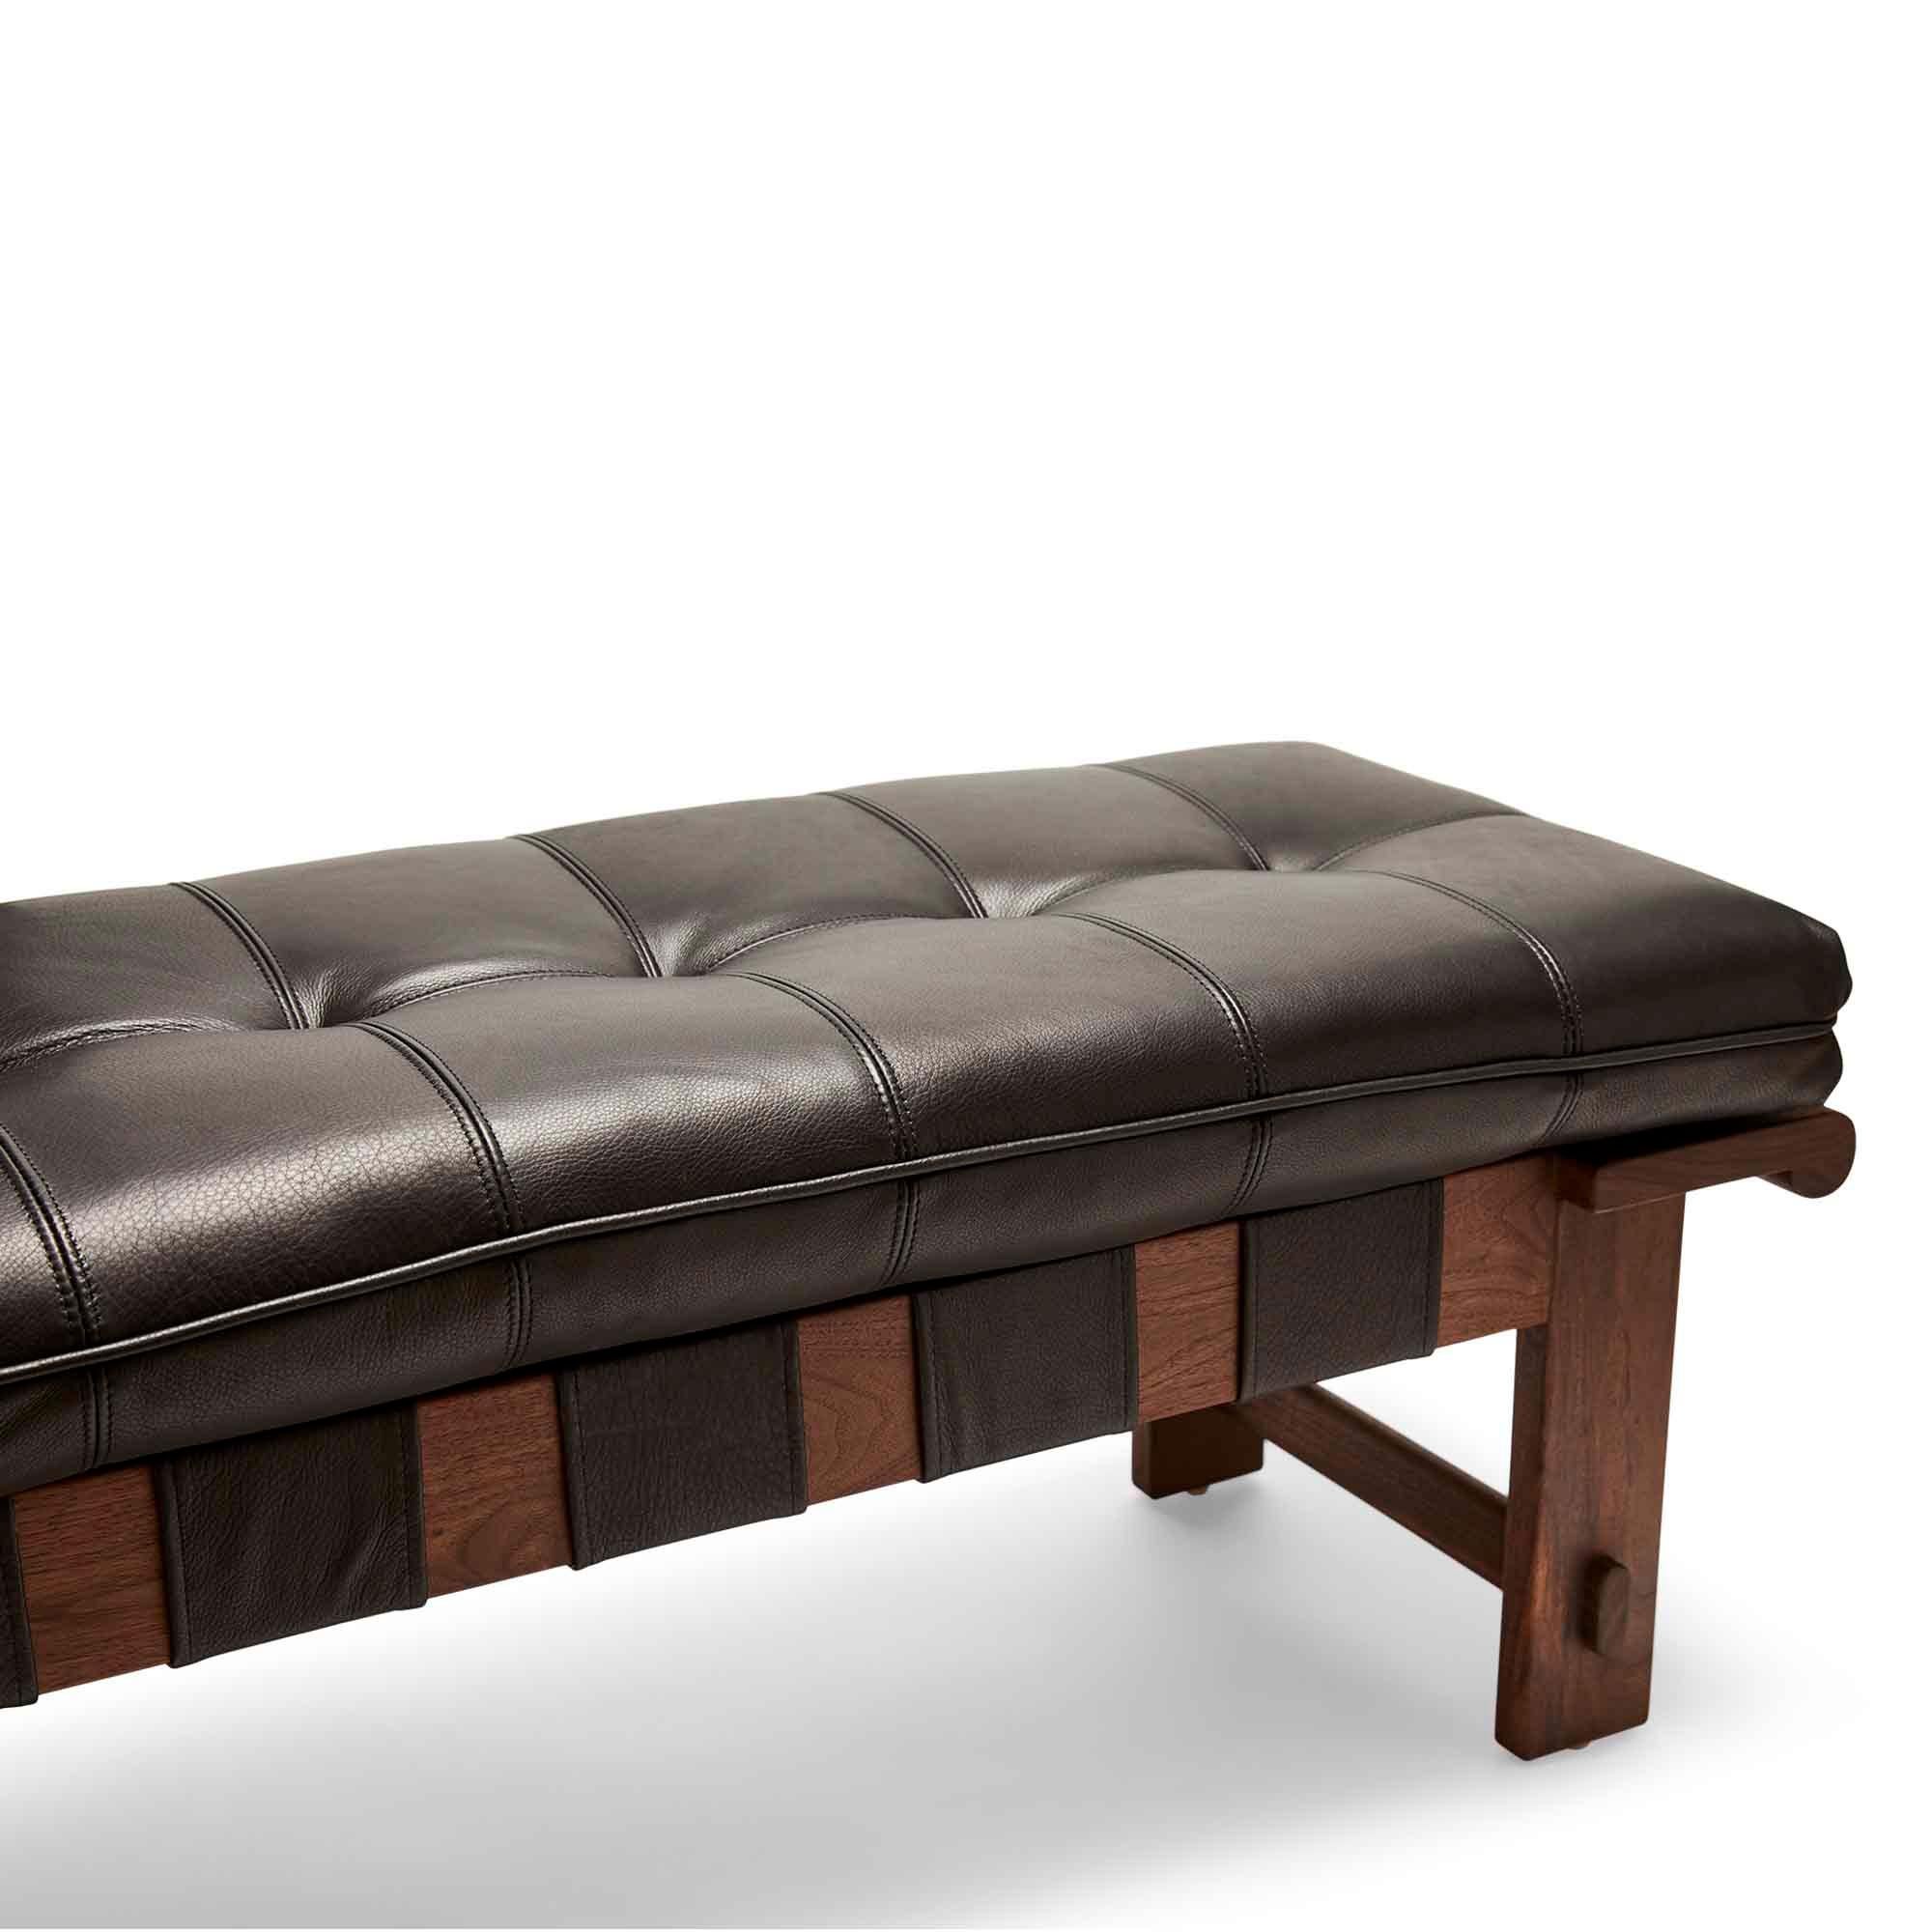 Walnut and Black Leather Ojai Bench by Lawson-Fenning In New Condition For Sale In Los Angeles, CA